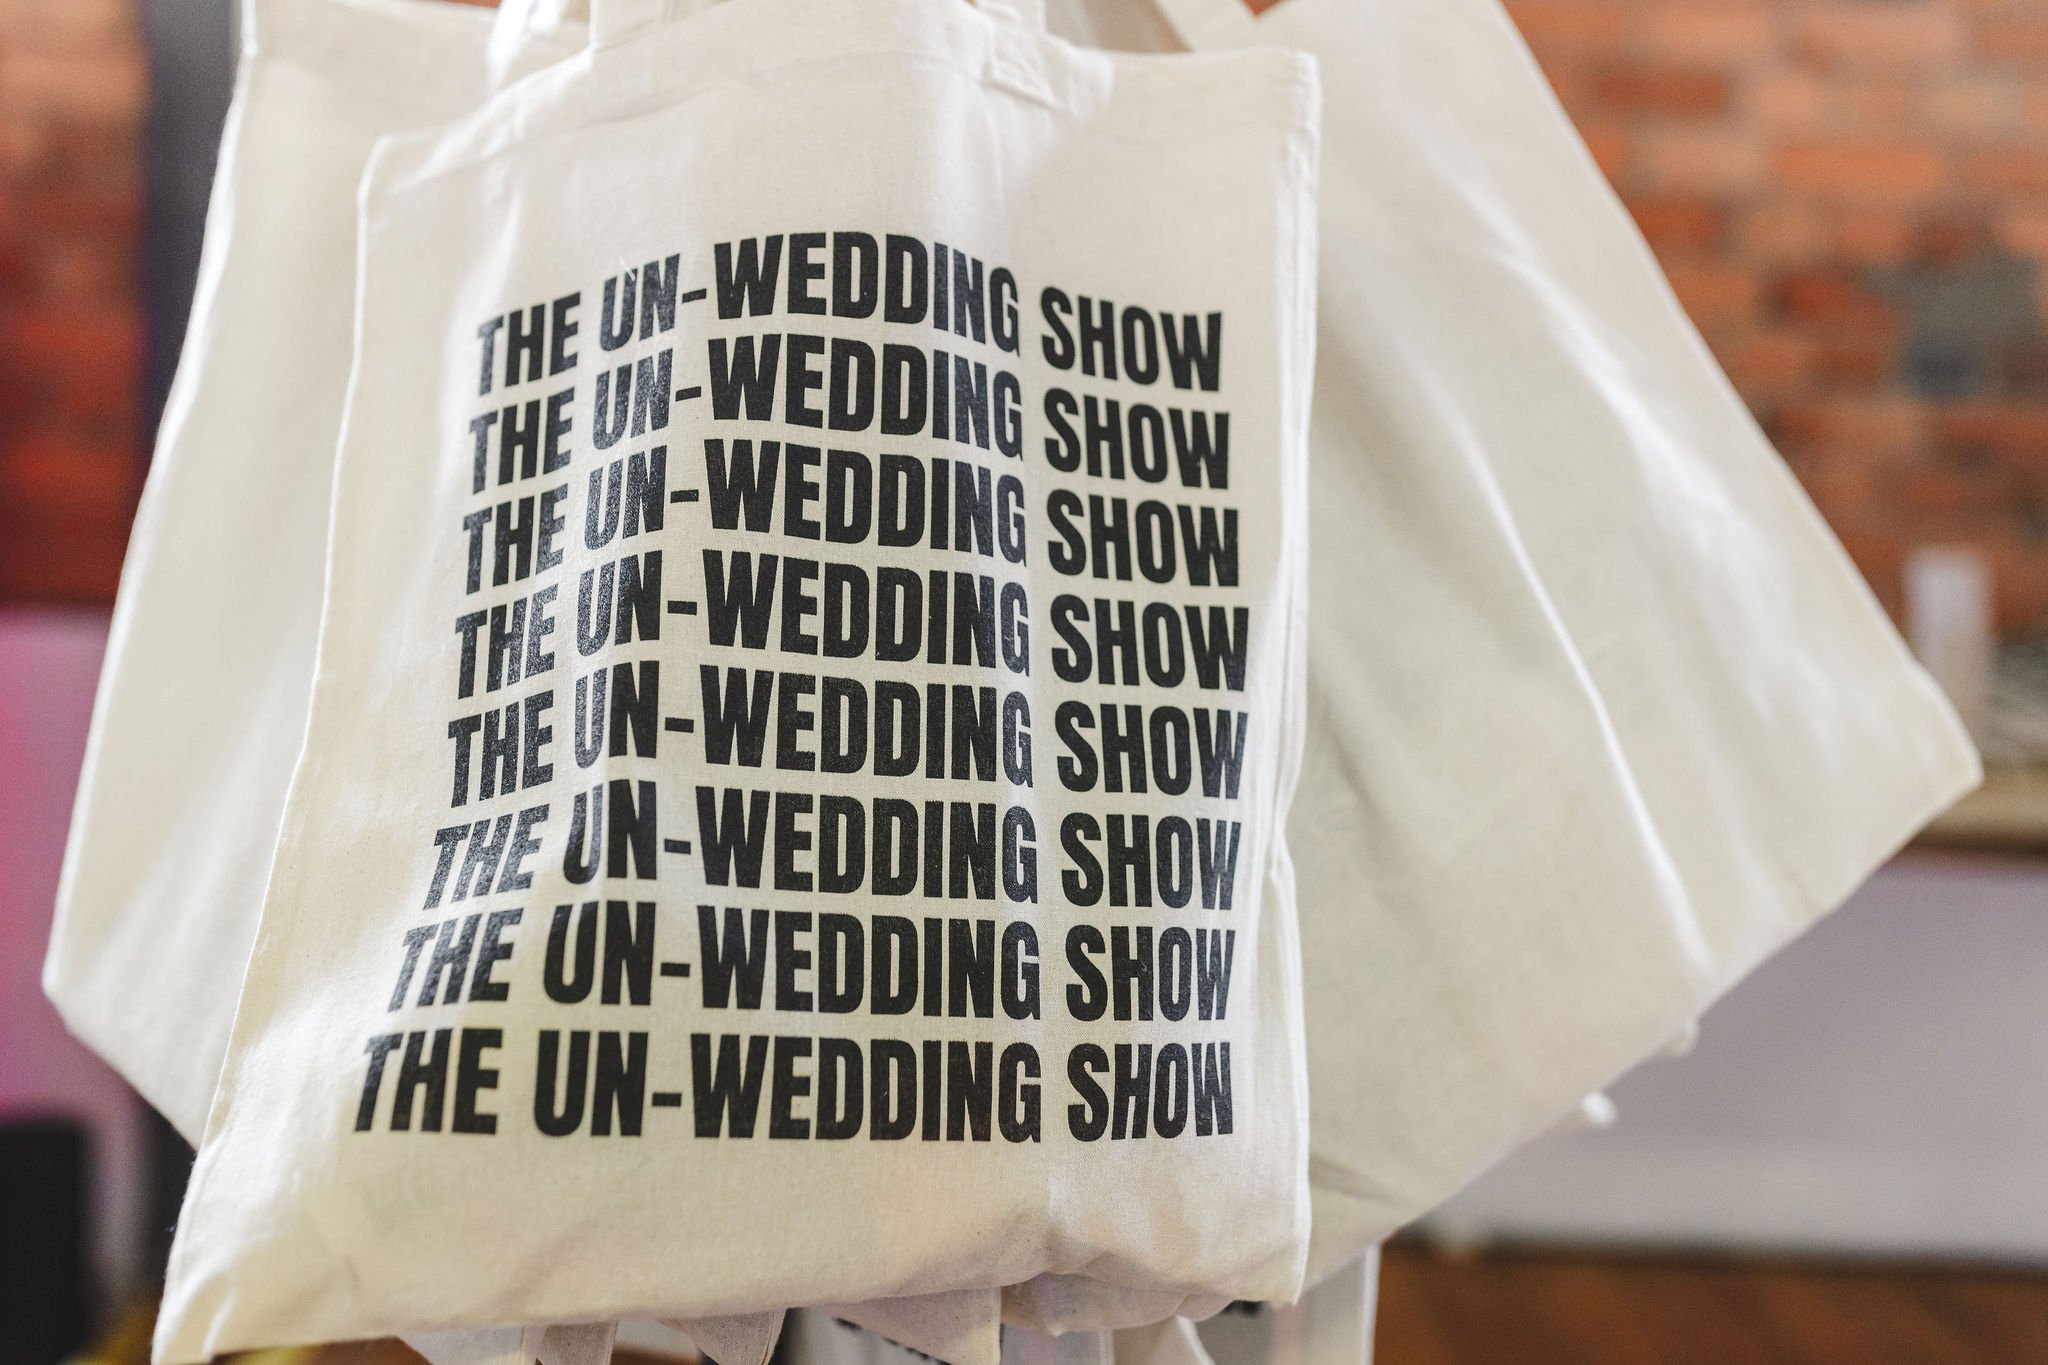  The Un-Wedding Show Bristol VIP bags filled with lots of fun things to discover. 